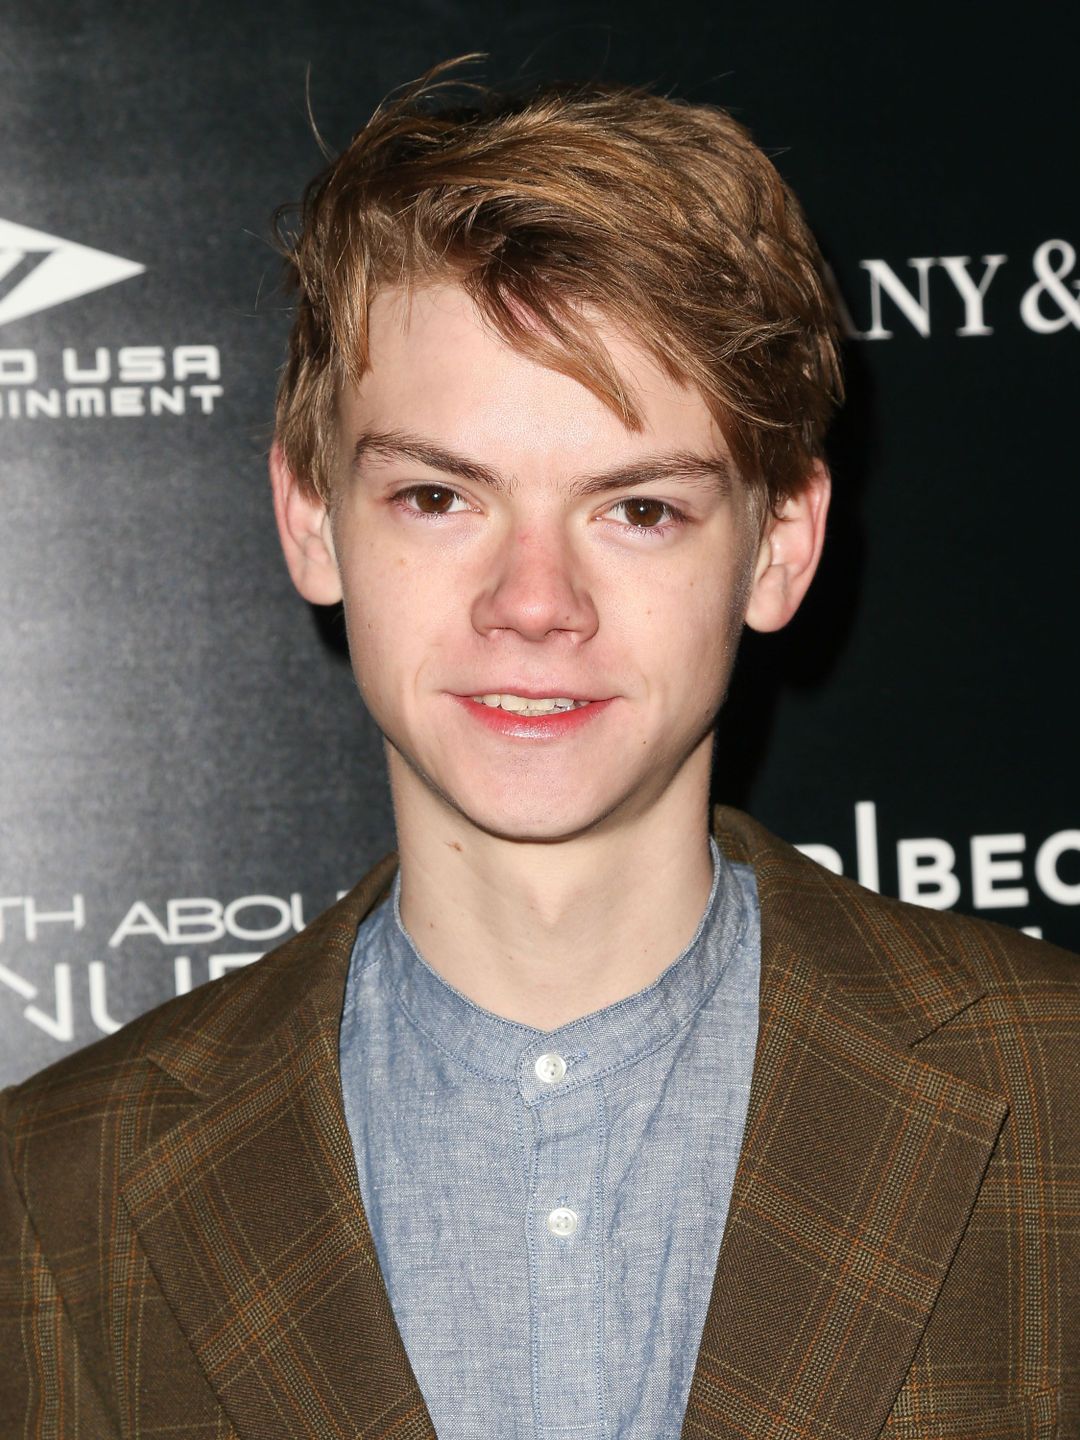 Thomas Sangster how did he became famous